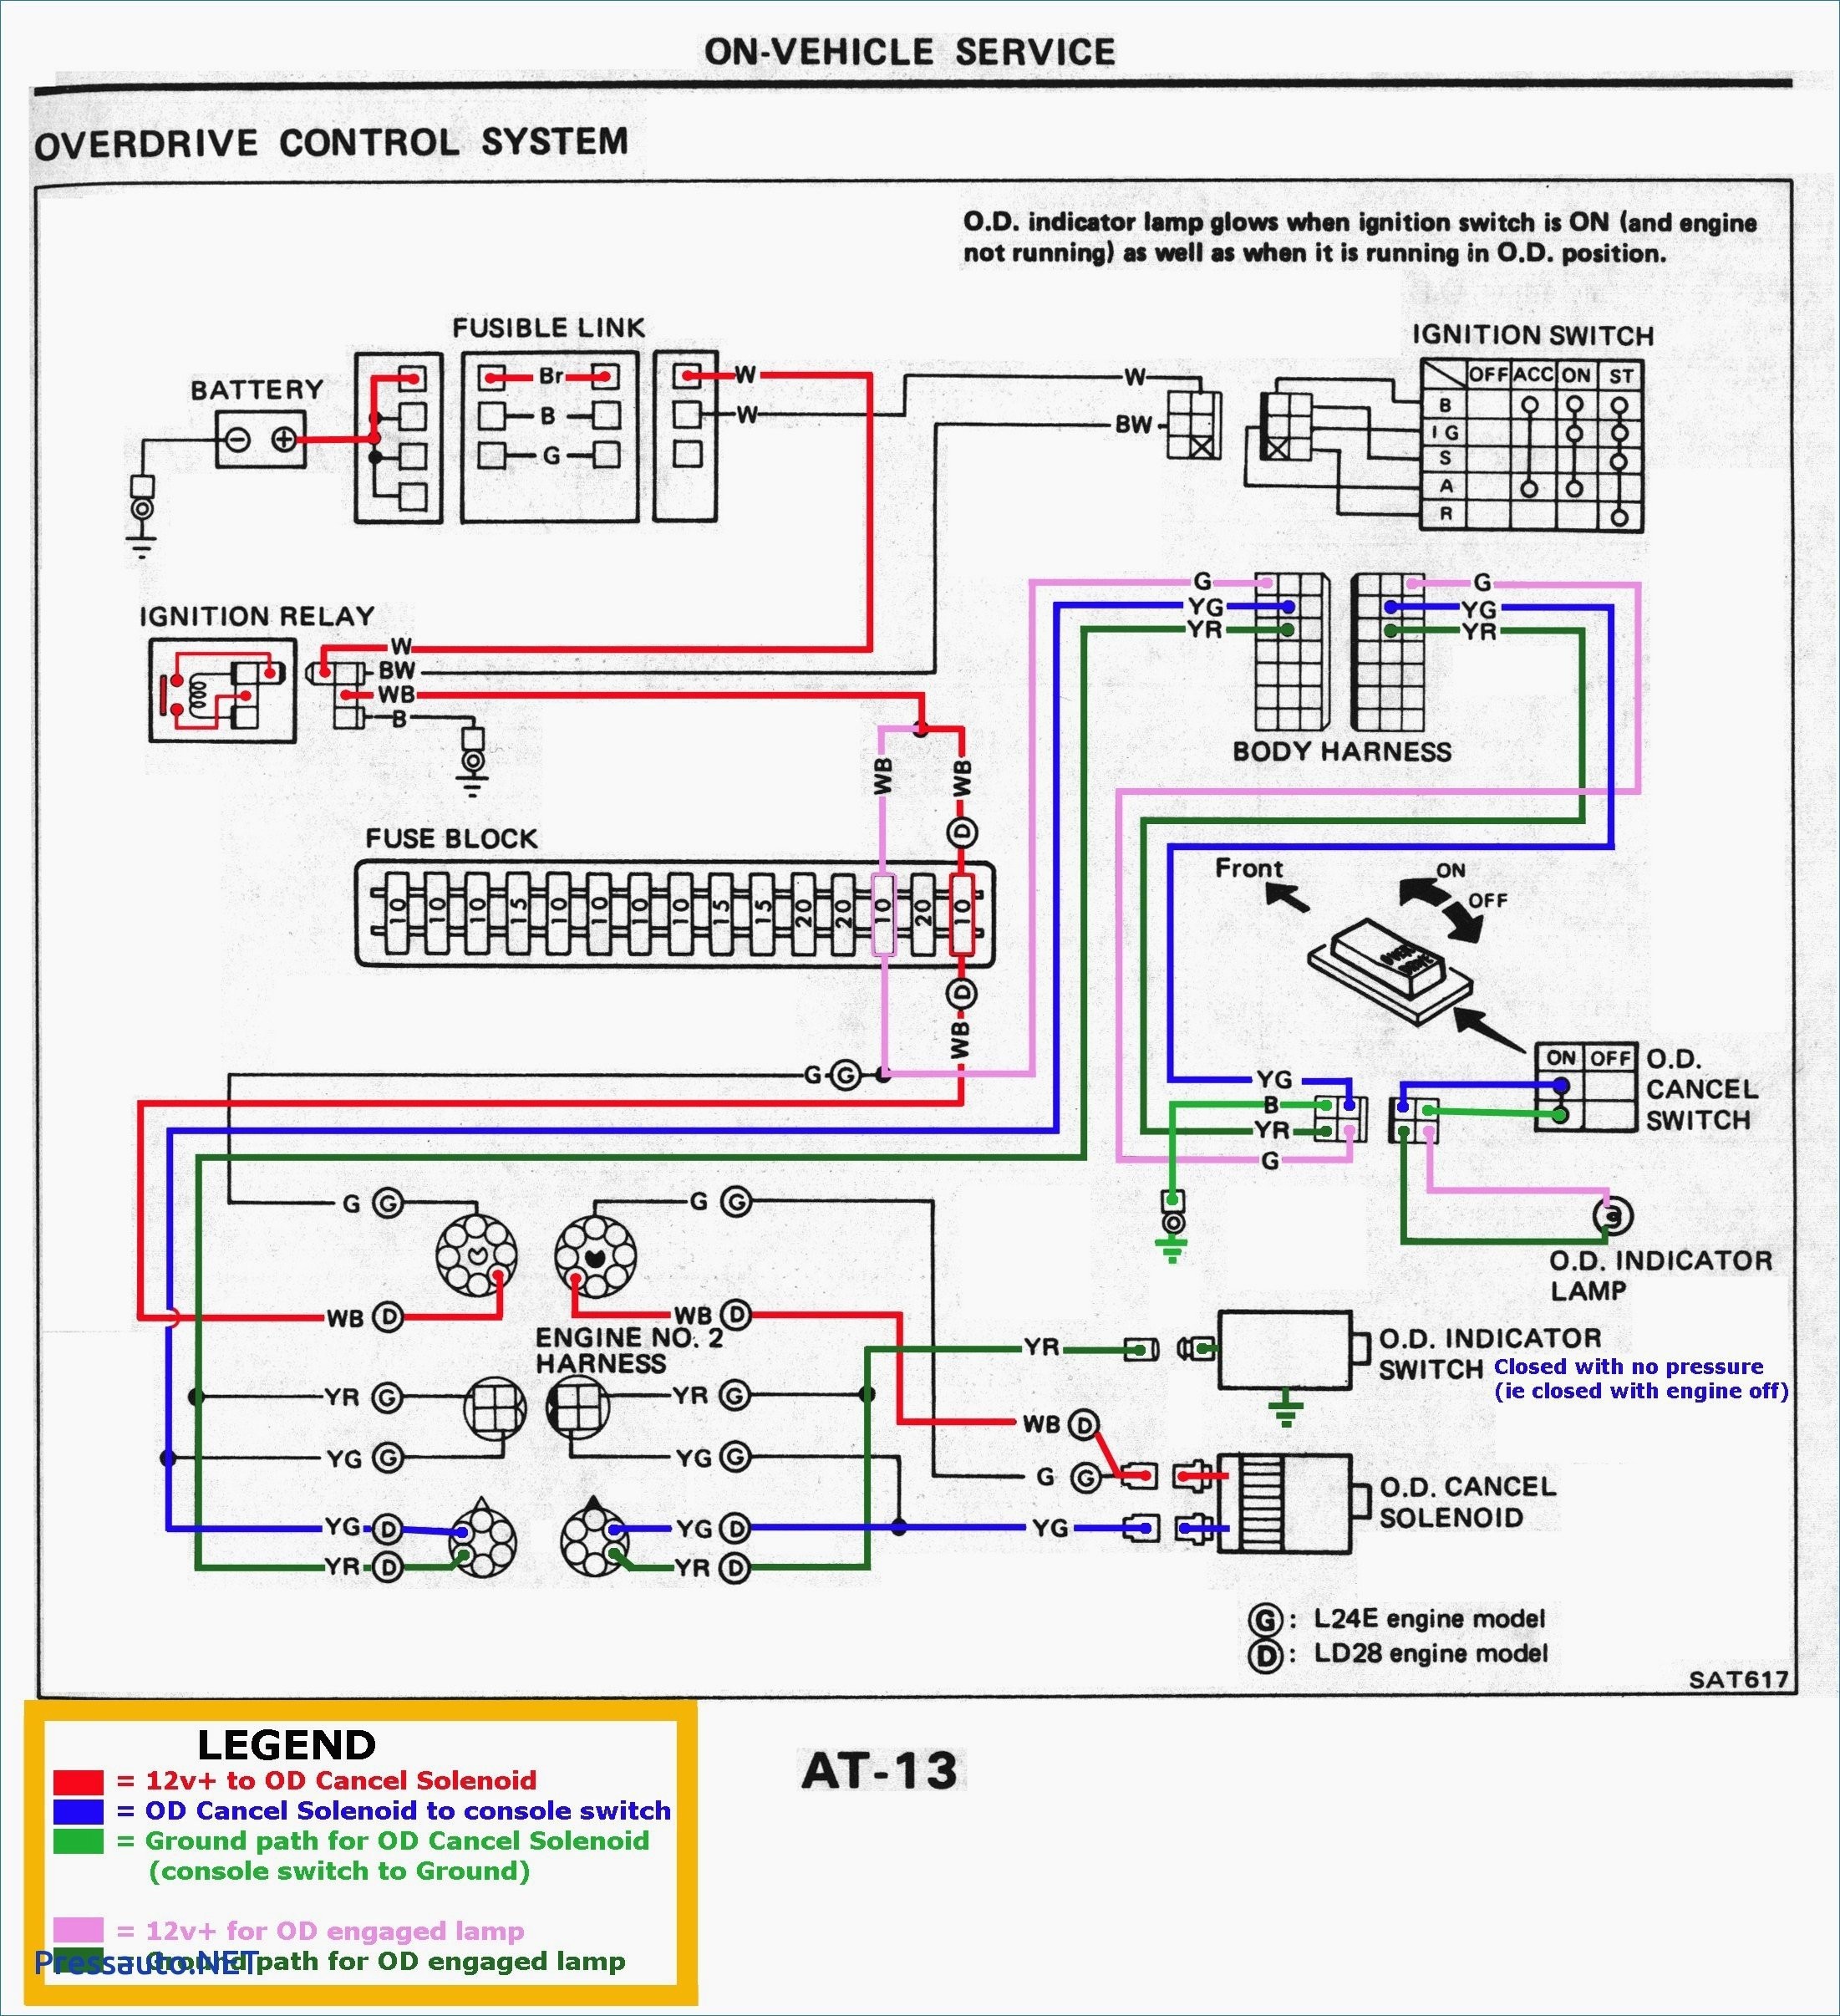 2004 ford Expedition Wiring Diagram Lovely 2006 ford Expedition Wiring Diagram 0d – Wiring Diagram Collection